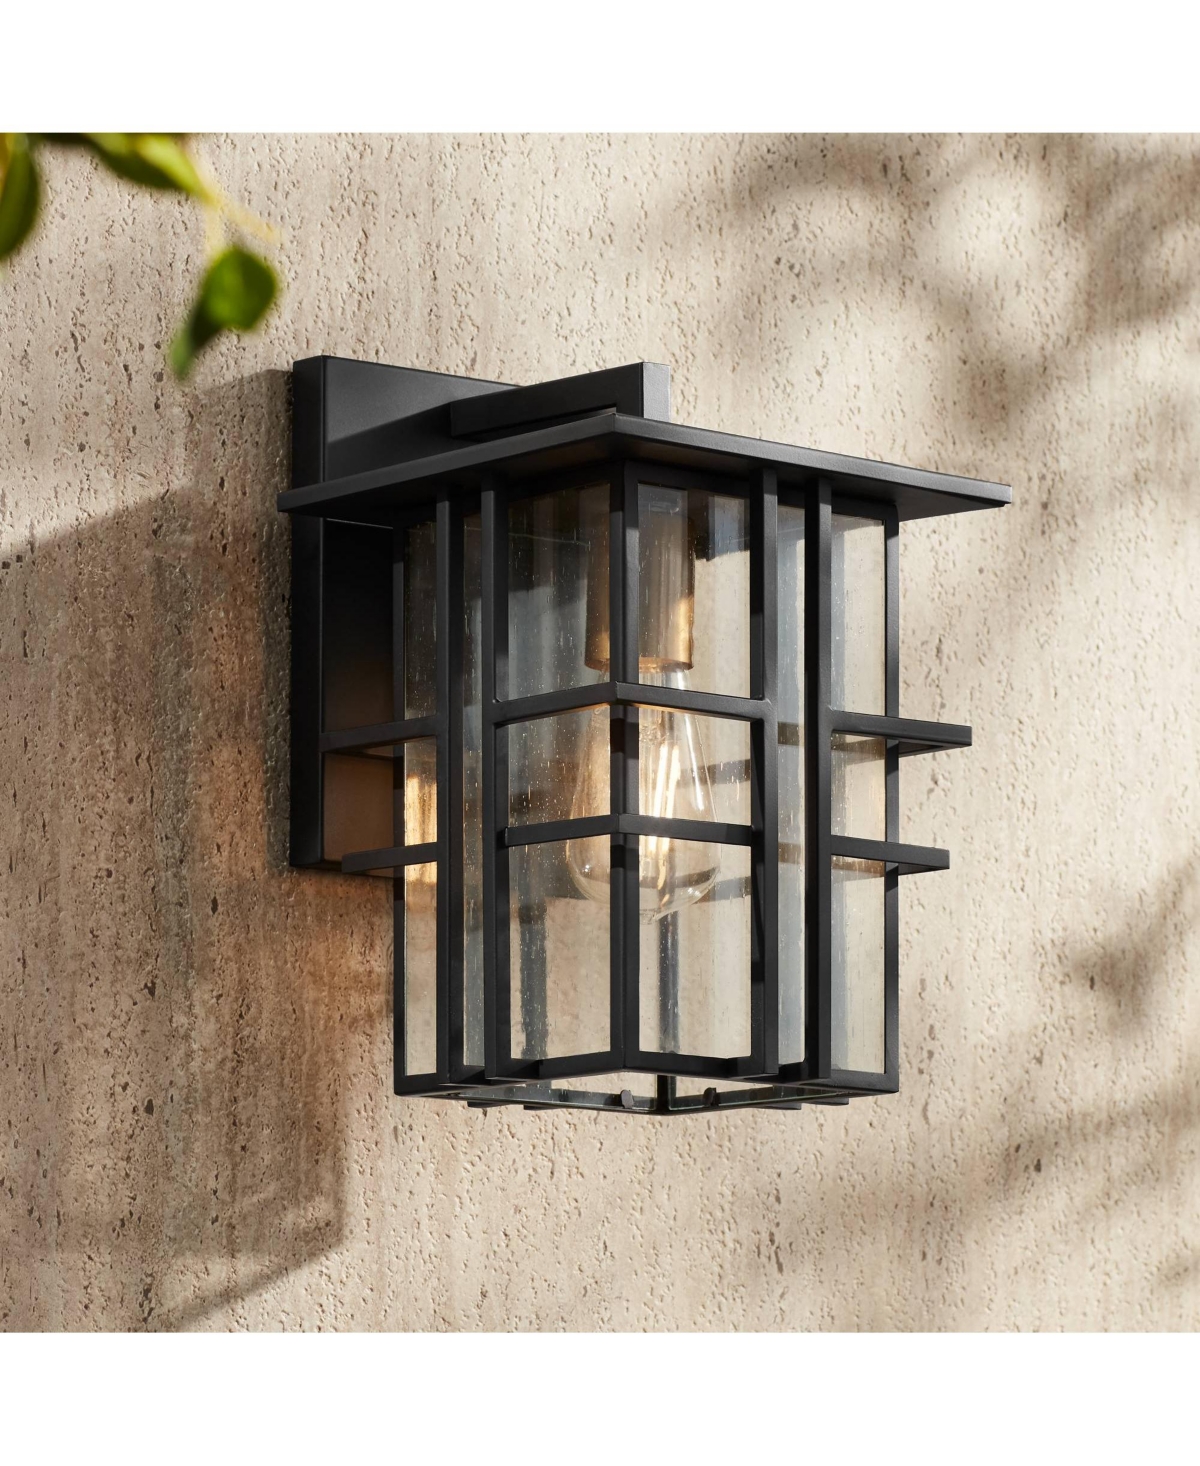 Arley Modern Outdoor Wall Light Fixture Black Geometric Frame 12" Seedy Glass for Exterior Barn Deck House Porch Yard Patio Outside Garage Front Door